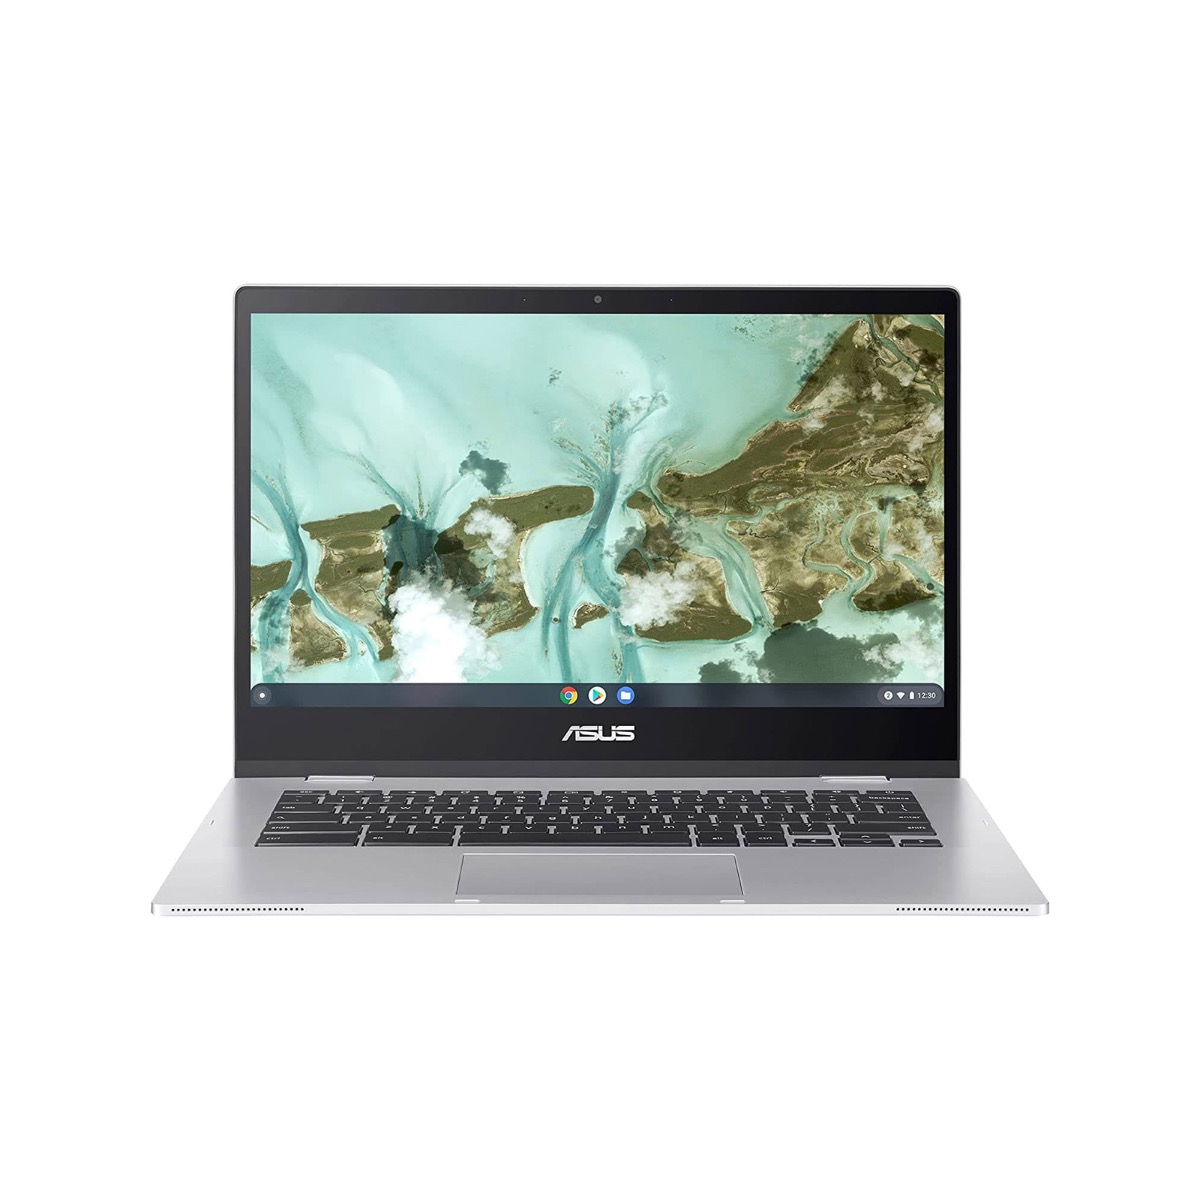 Asus-CX1400CNA-C464S0C-Asus-CX1400CNA-C464S0C-CX1400CNA-C464S0C-Laptops | LaptopSA.co.za a division of the notebook company 